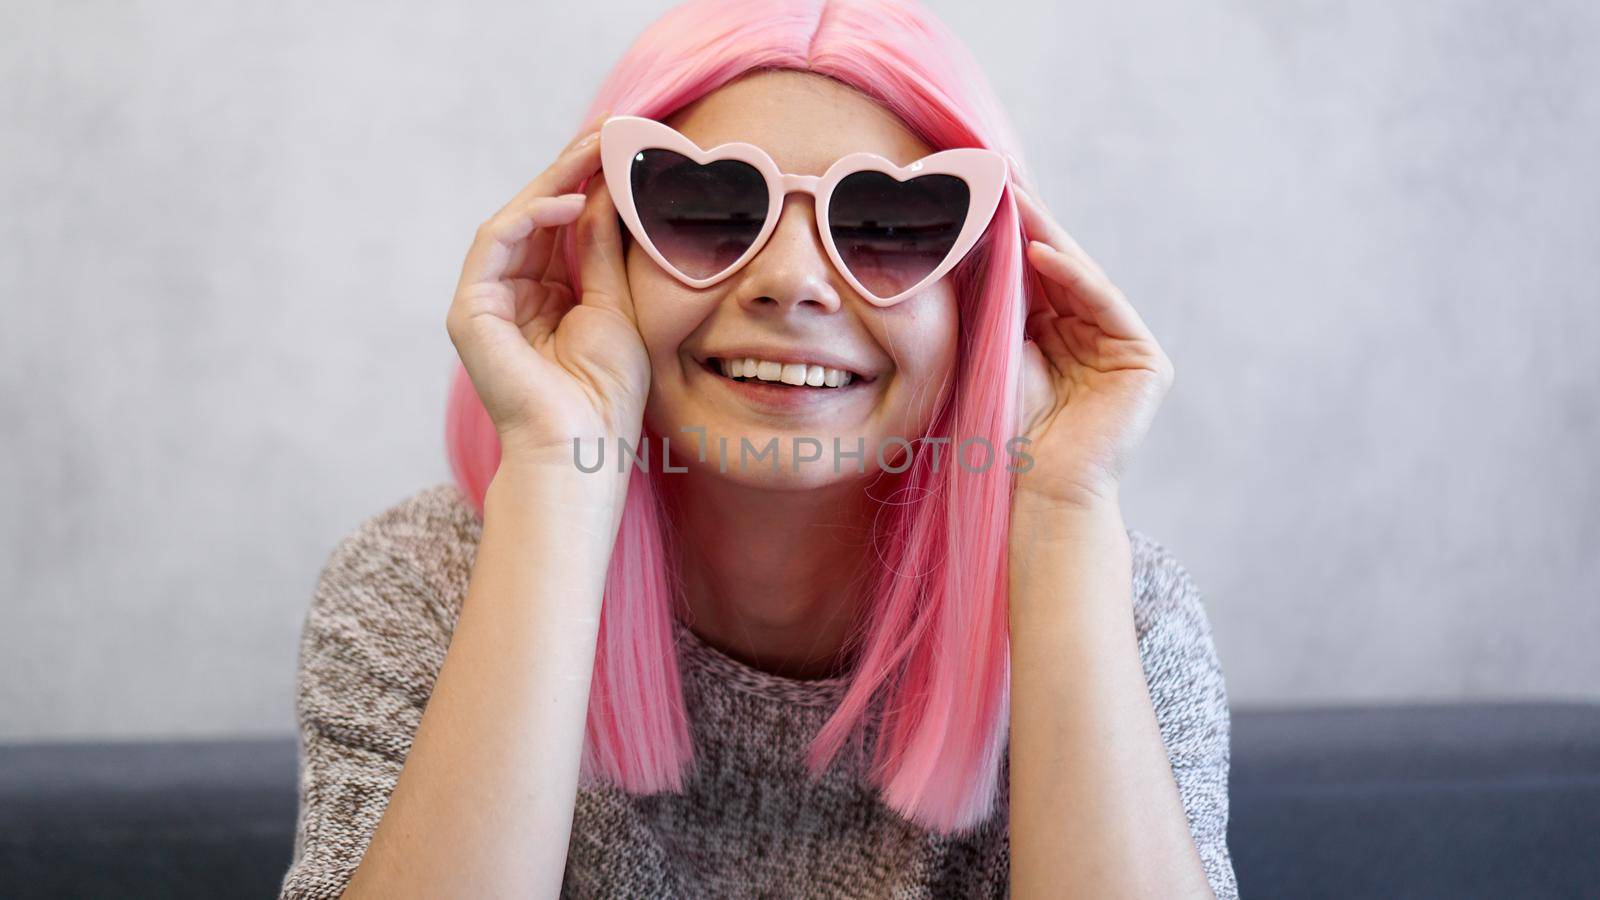 Woman wearing glasses and pink wig - positive portrait by natali_brill